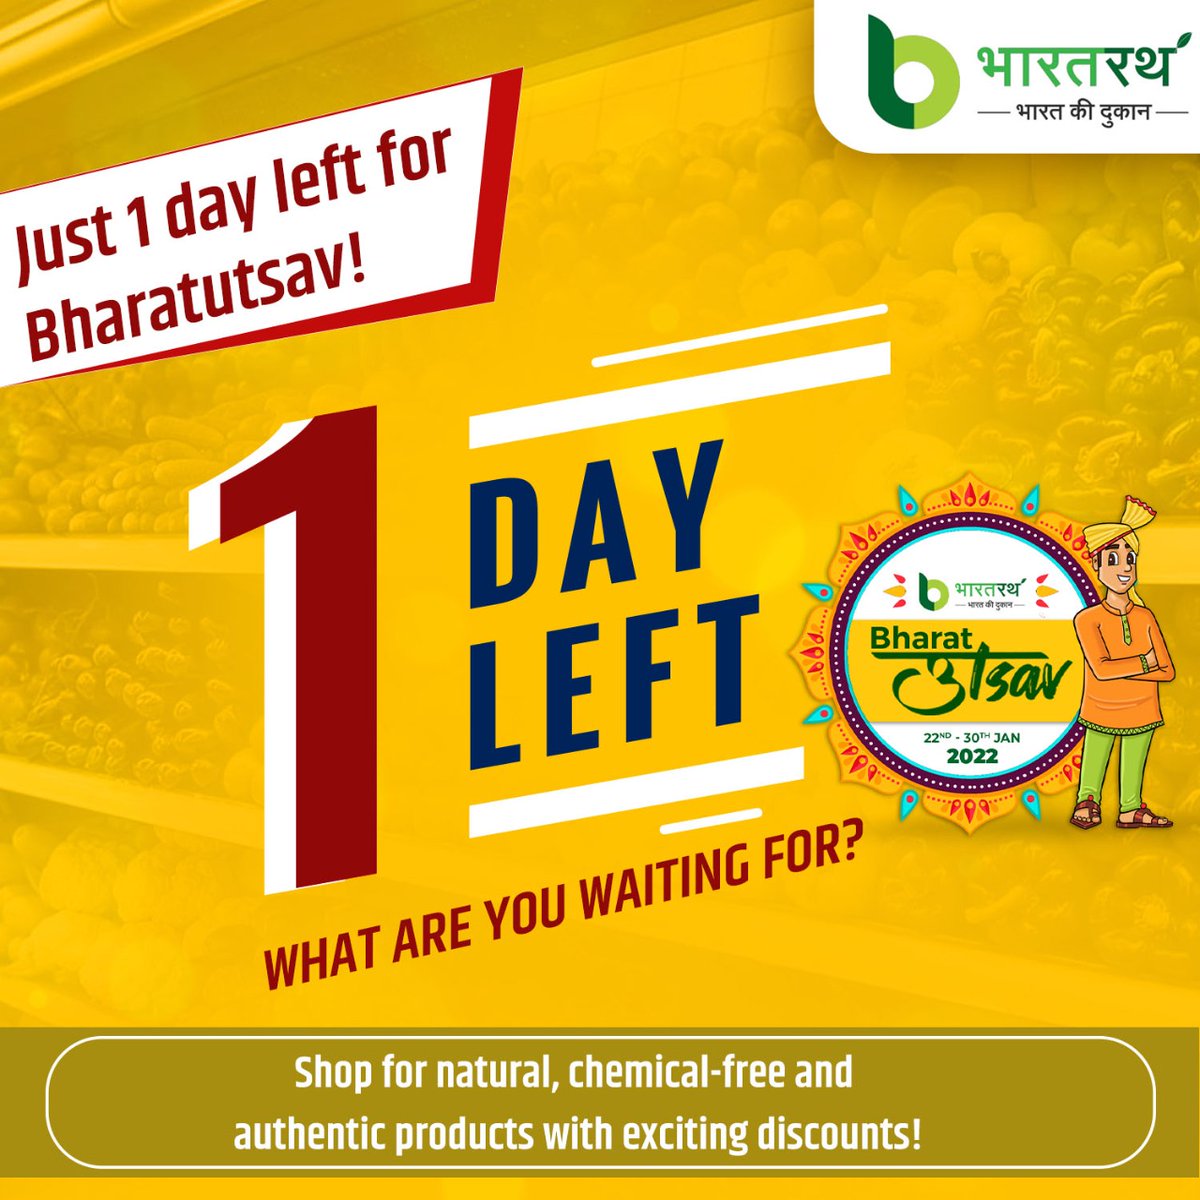 Be a part of the celebration of Bharatiya Producers. Shop for natural, chemical-free and authentic products with exciting discounts today! 

Visit bharatrath.com or download the app now! #Bharatutsav